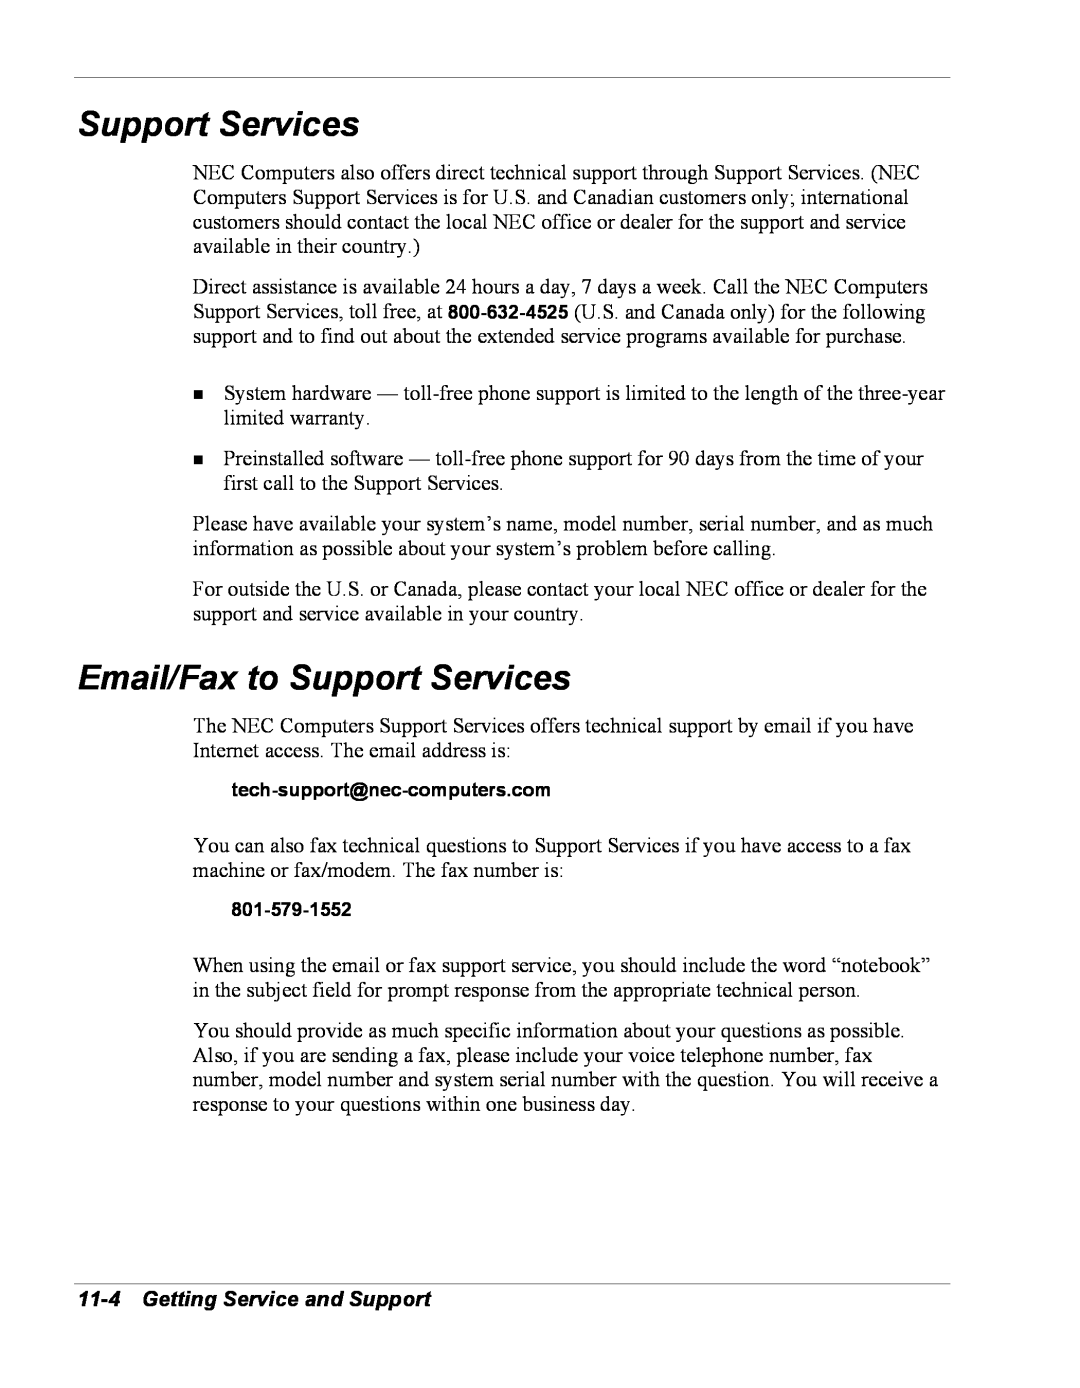 NEC Versa Series manual Email/Fax to Support Services, Getting Service and Support 